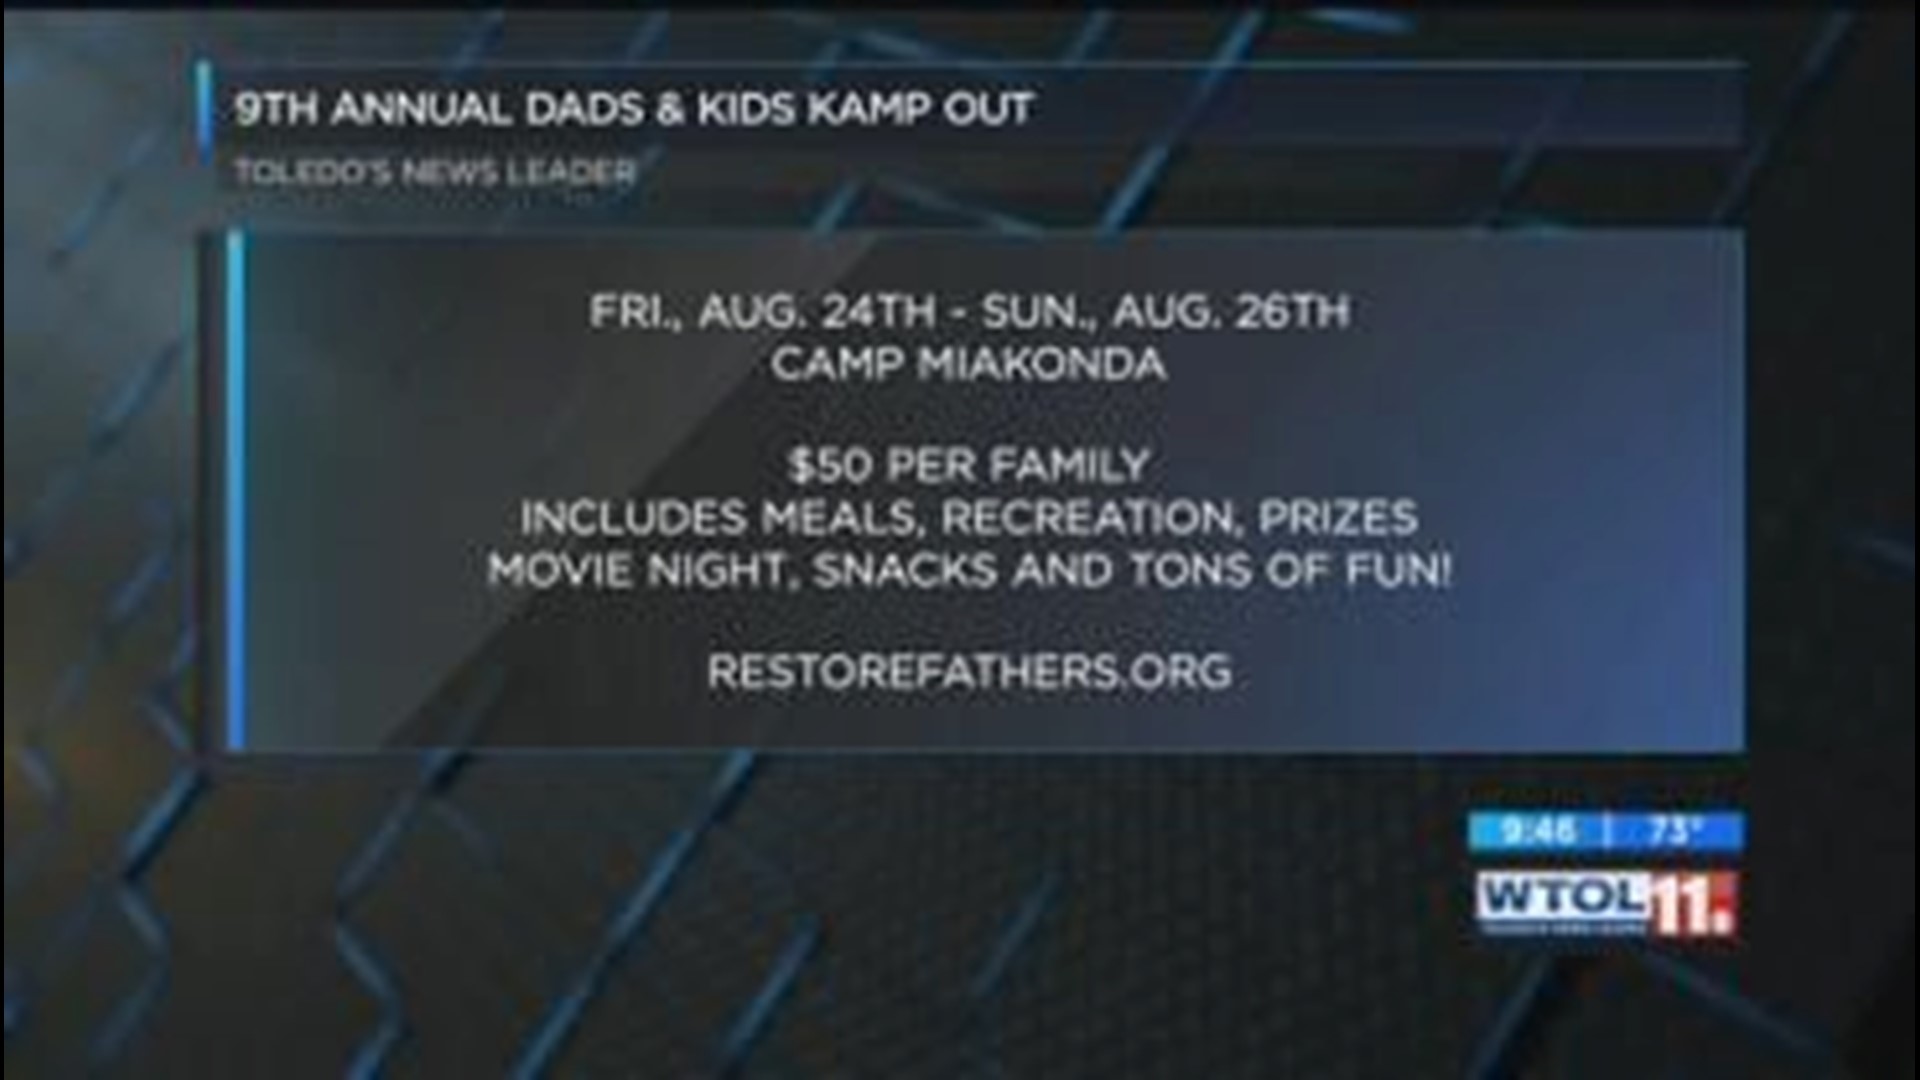 Enjoy the 9th annual Dads & Kids Kamp Out